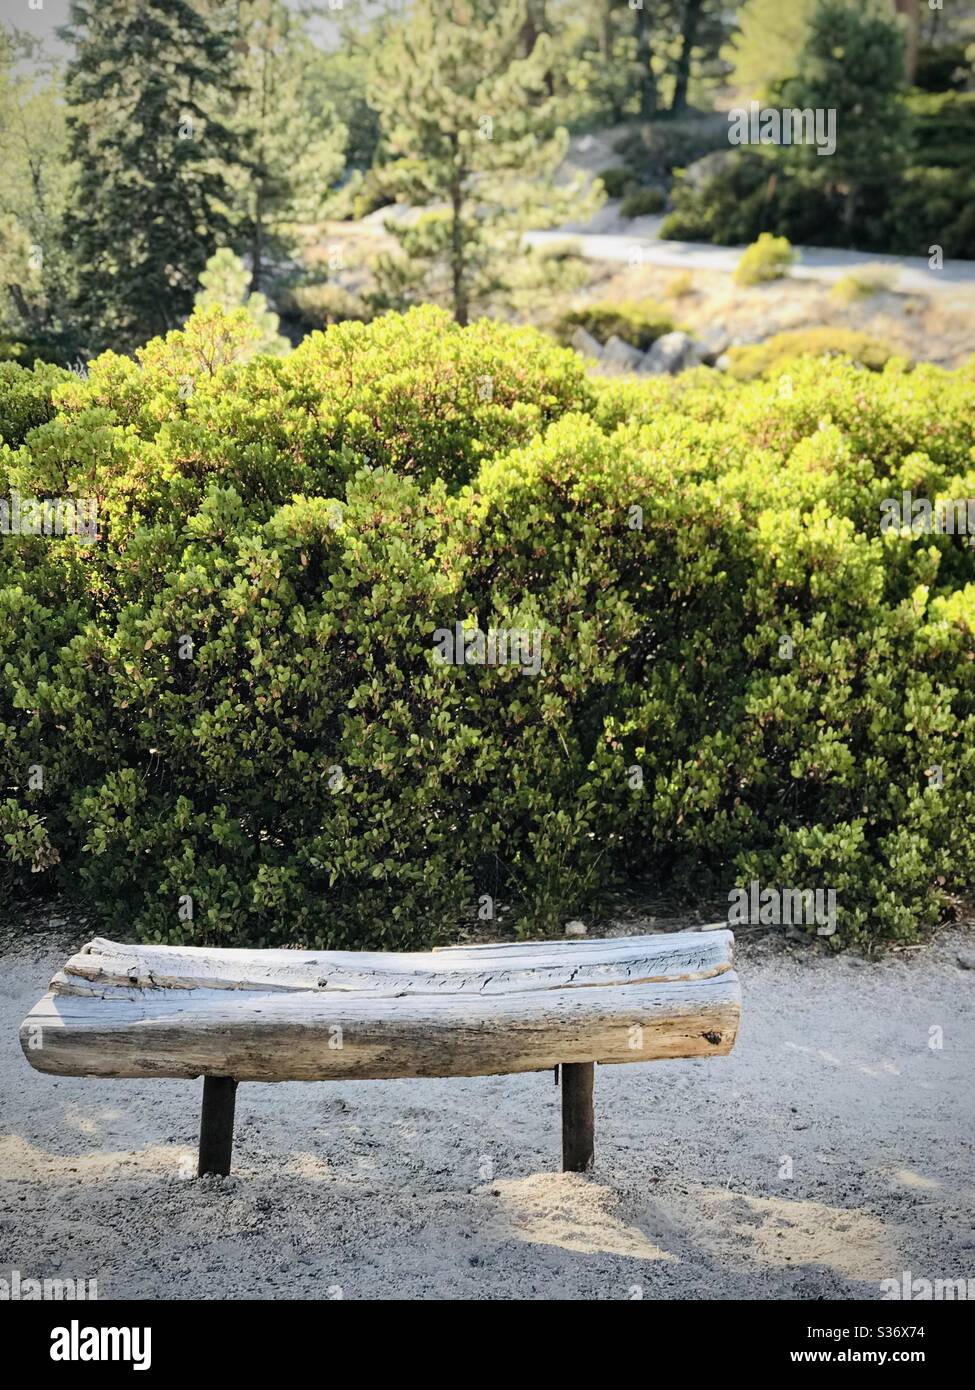 A bench with a serene and peaceful overlook of nature in the mountains. Stock Photo